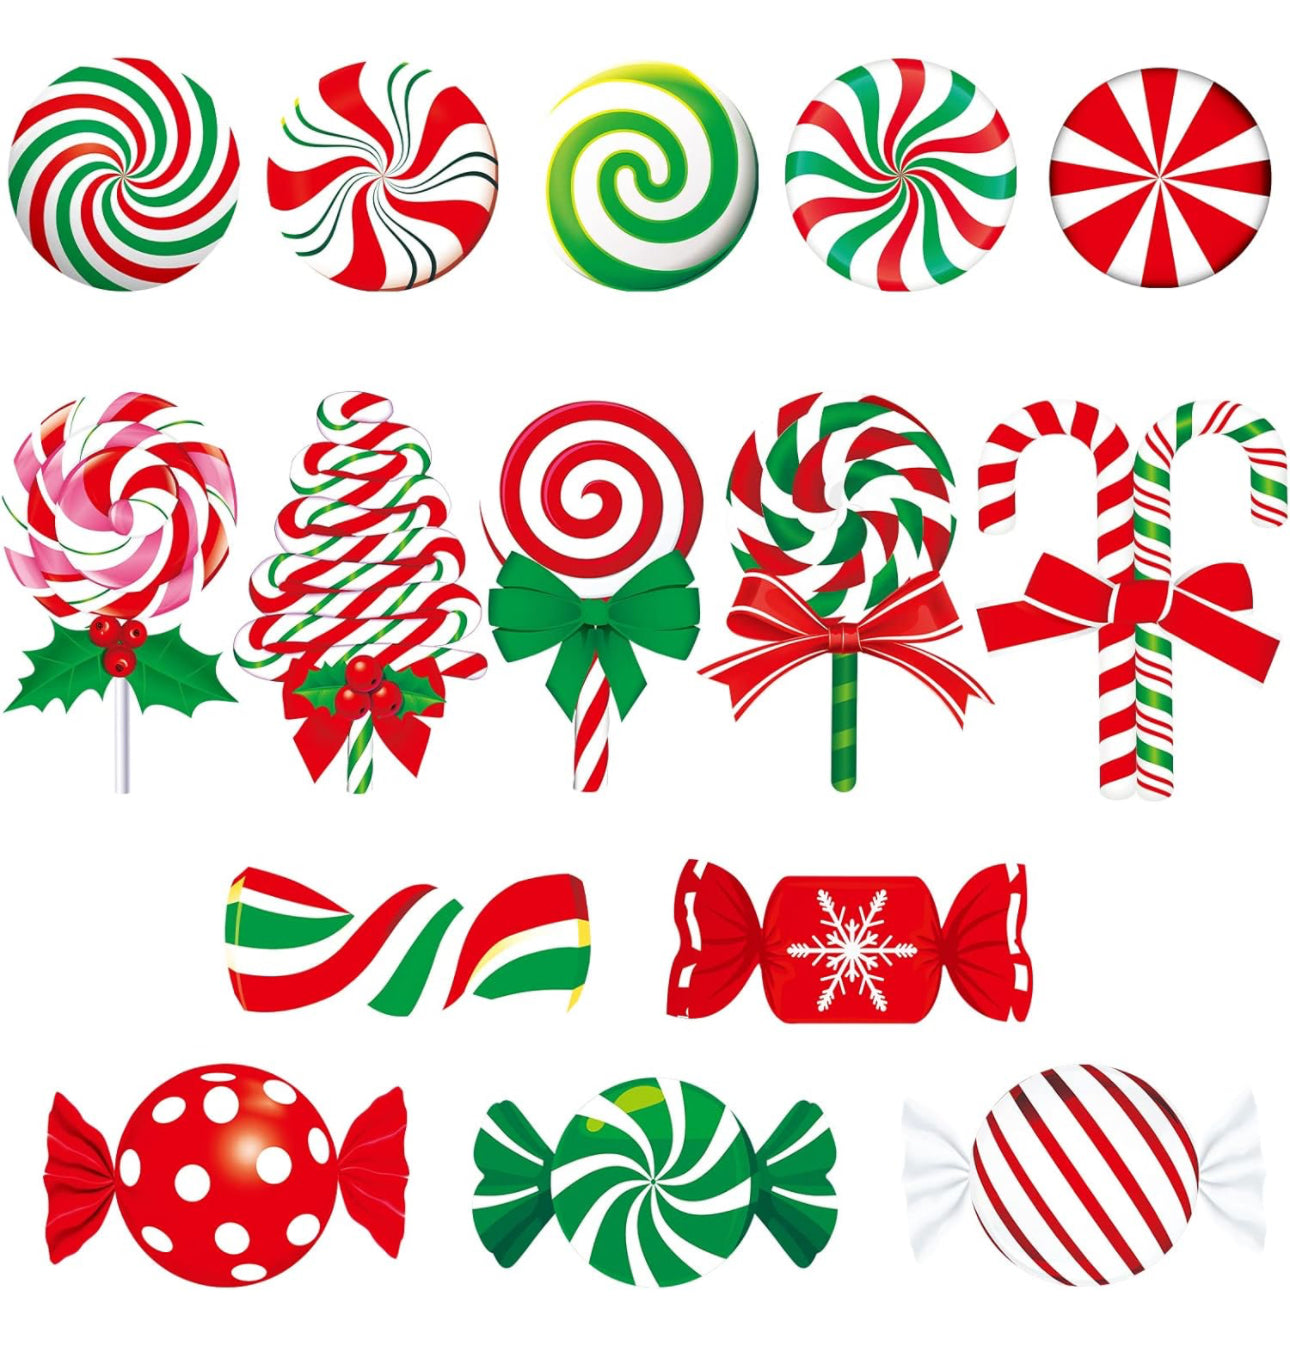 45 Pcs Peppermint Floor Stickers Decals Christmas Candyland Party Decorations Self Adhesive Christmas Candy Stickers for Xmas Valentine's Day Floor Window Clings Decor (Cute Style)